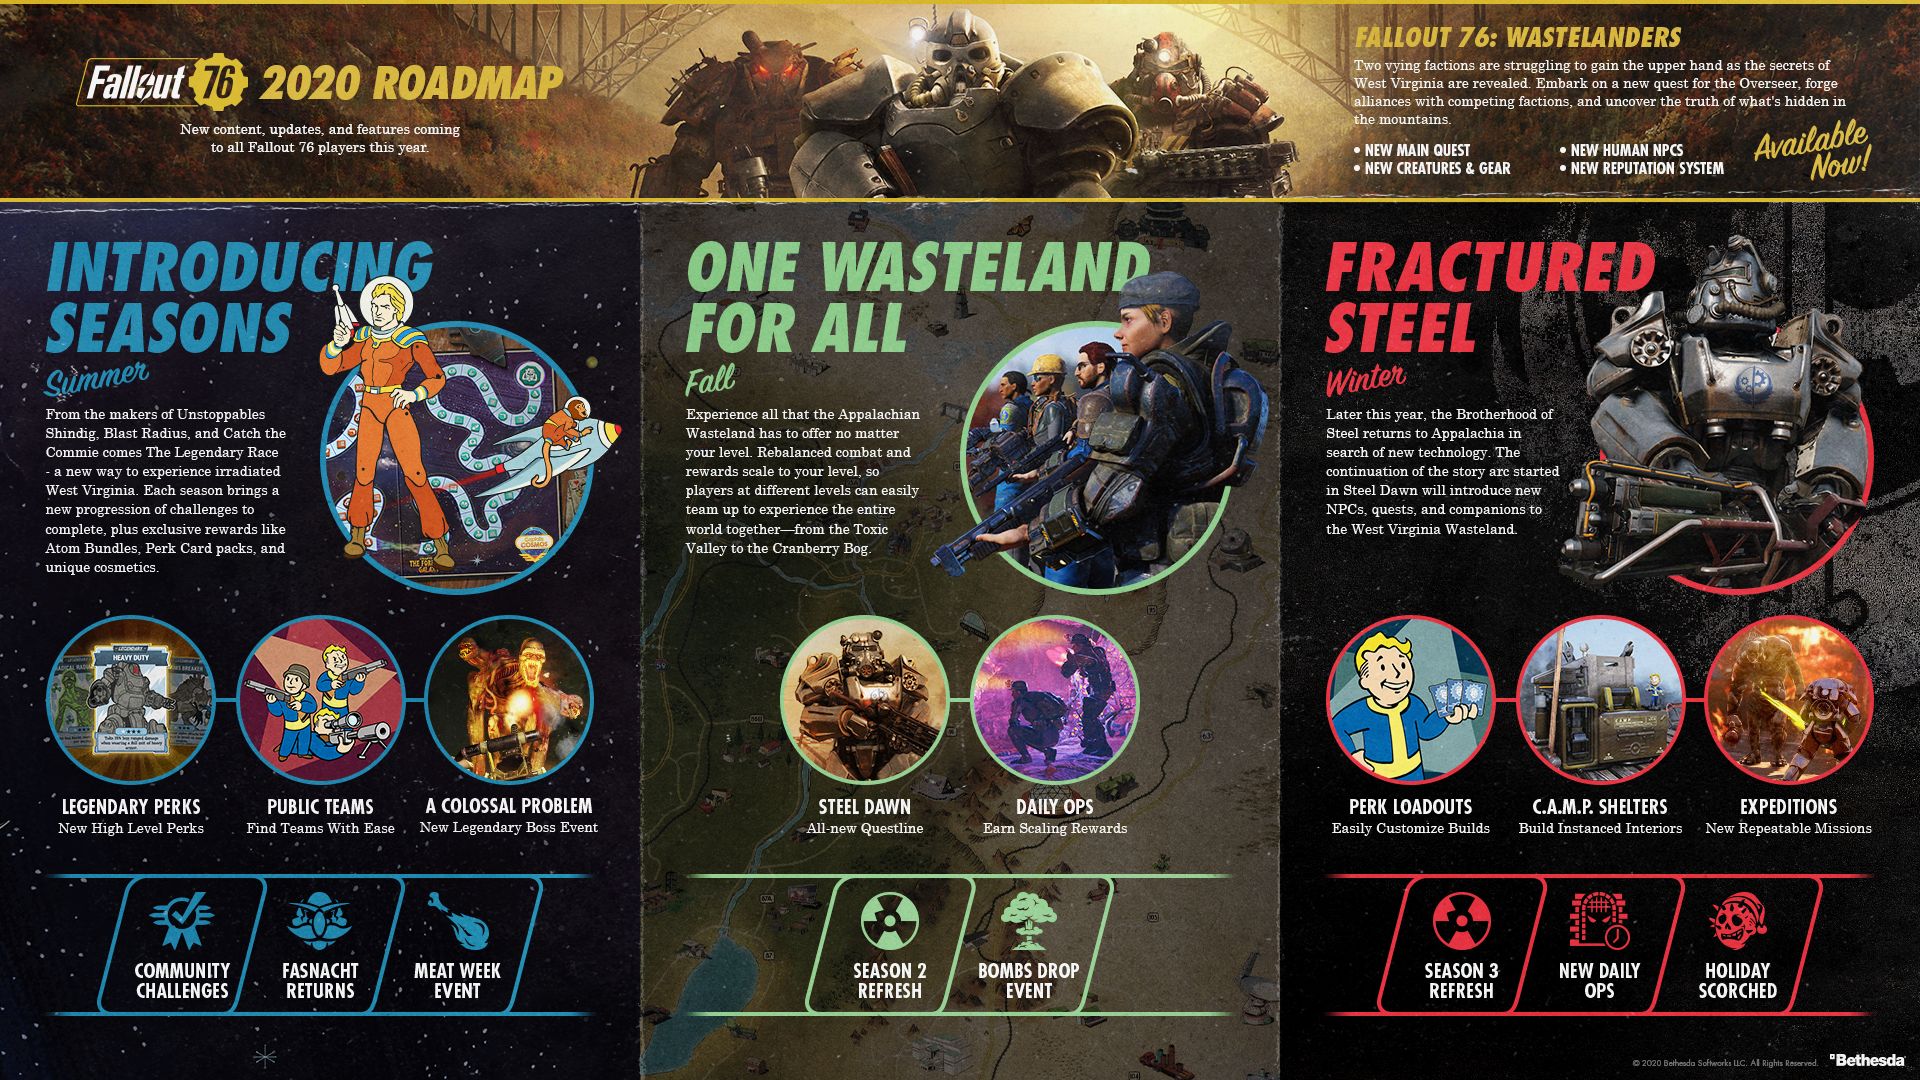 Fallout 76 Roadmap for 2020 Revealed Seasons, Daily Ops, Brotherhood